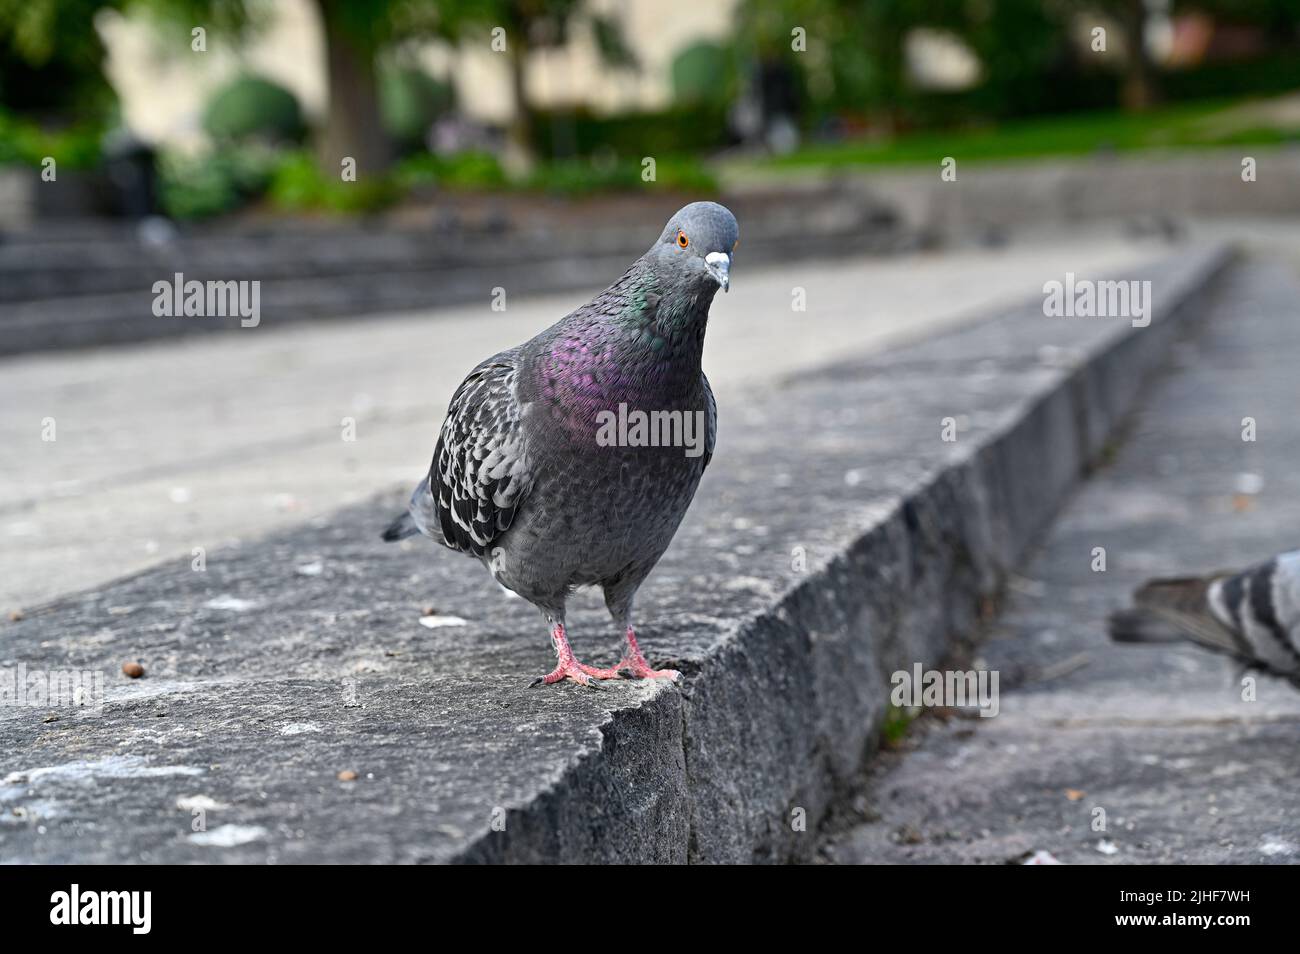 Dove standing looking curiously after food on stairs Stock Photo